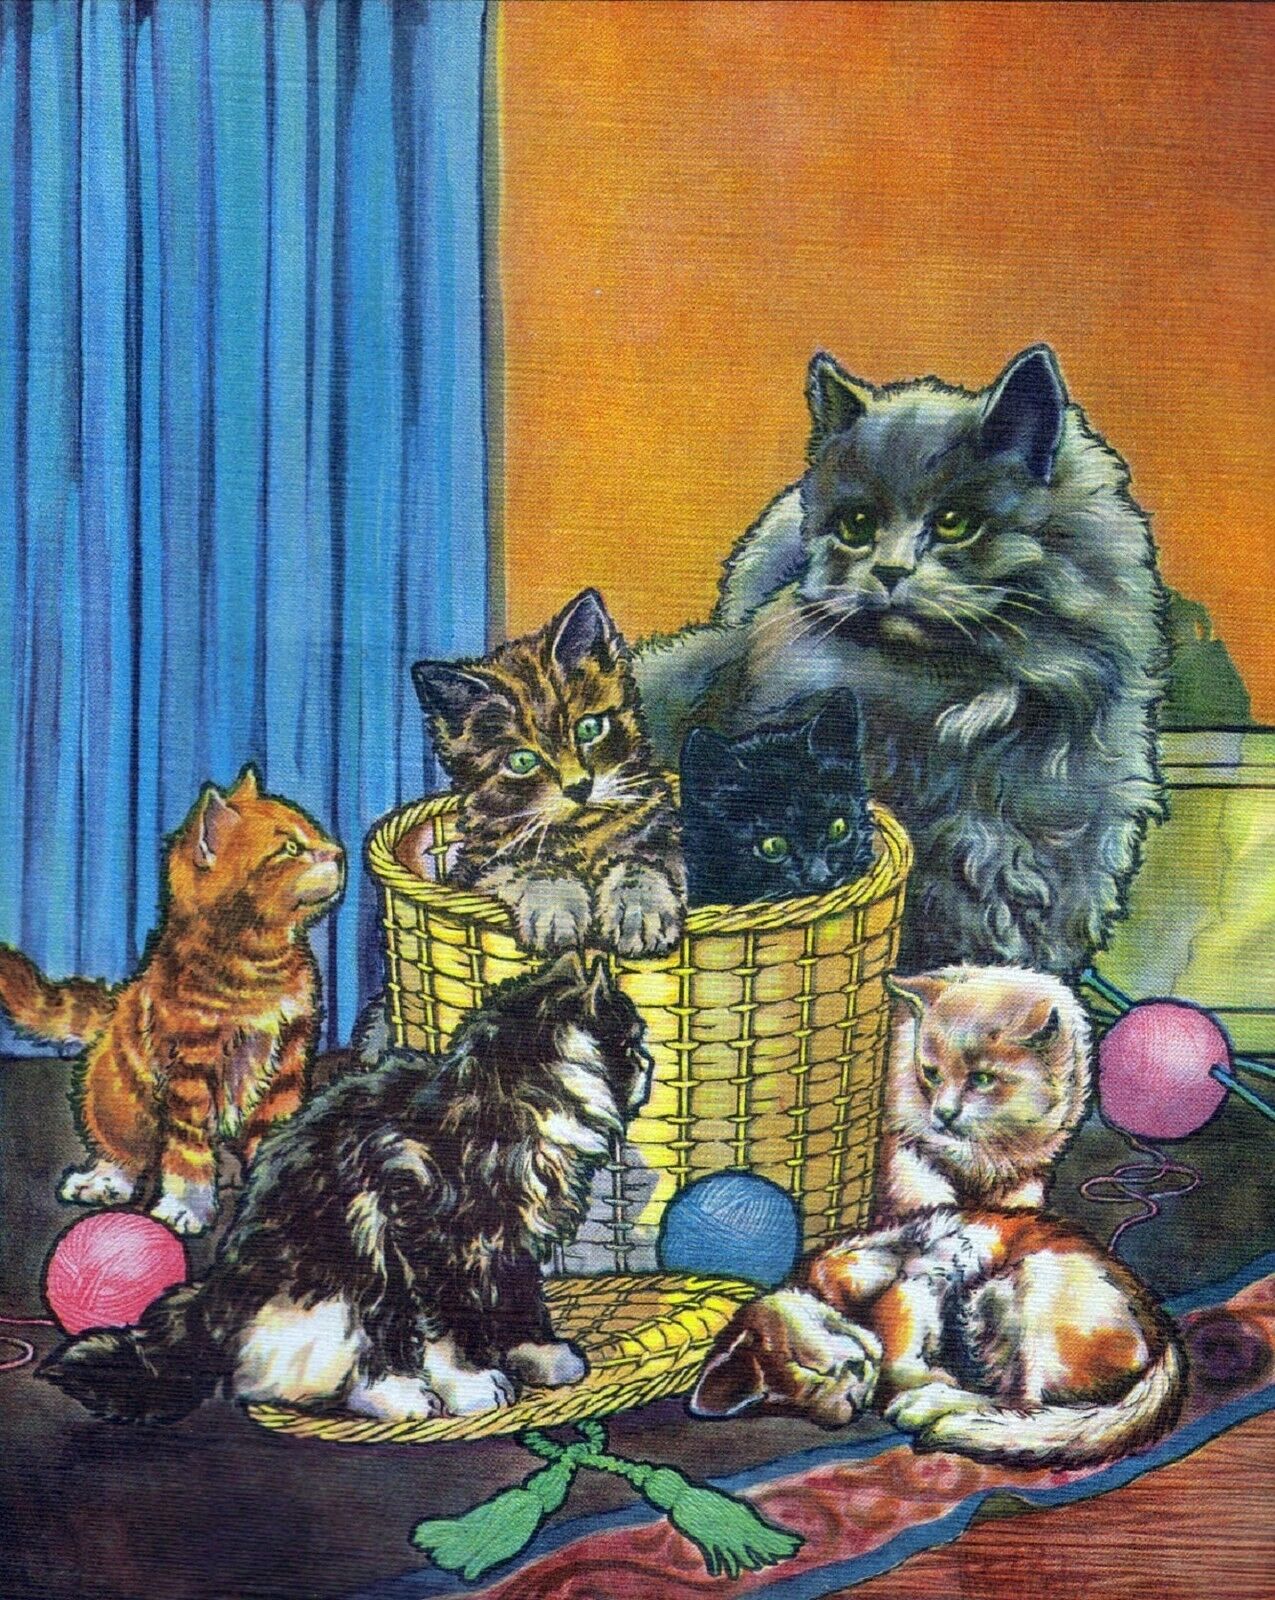 Most Gorgeous Cat Family Mom & Babies Beautiful 1943 Childrens Vintage Art Print